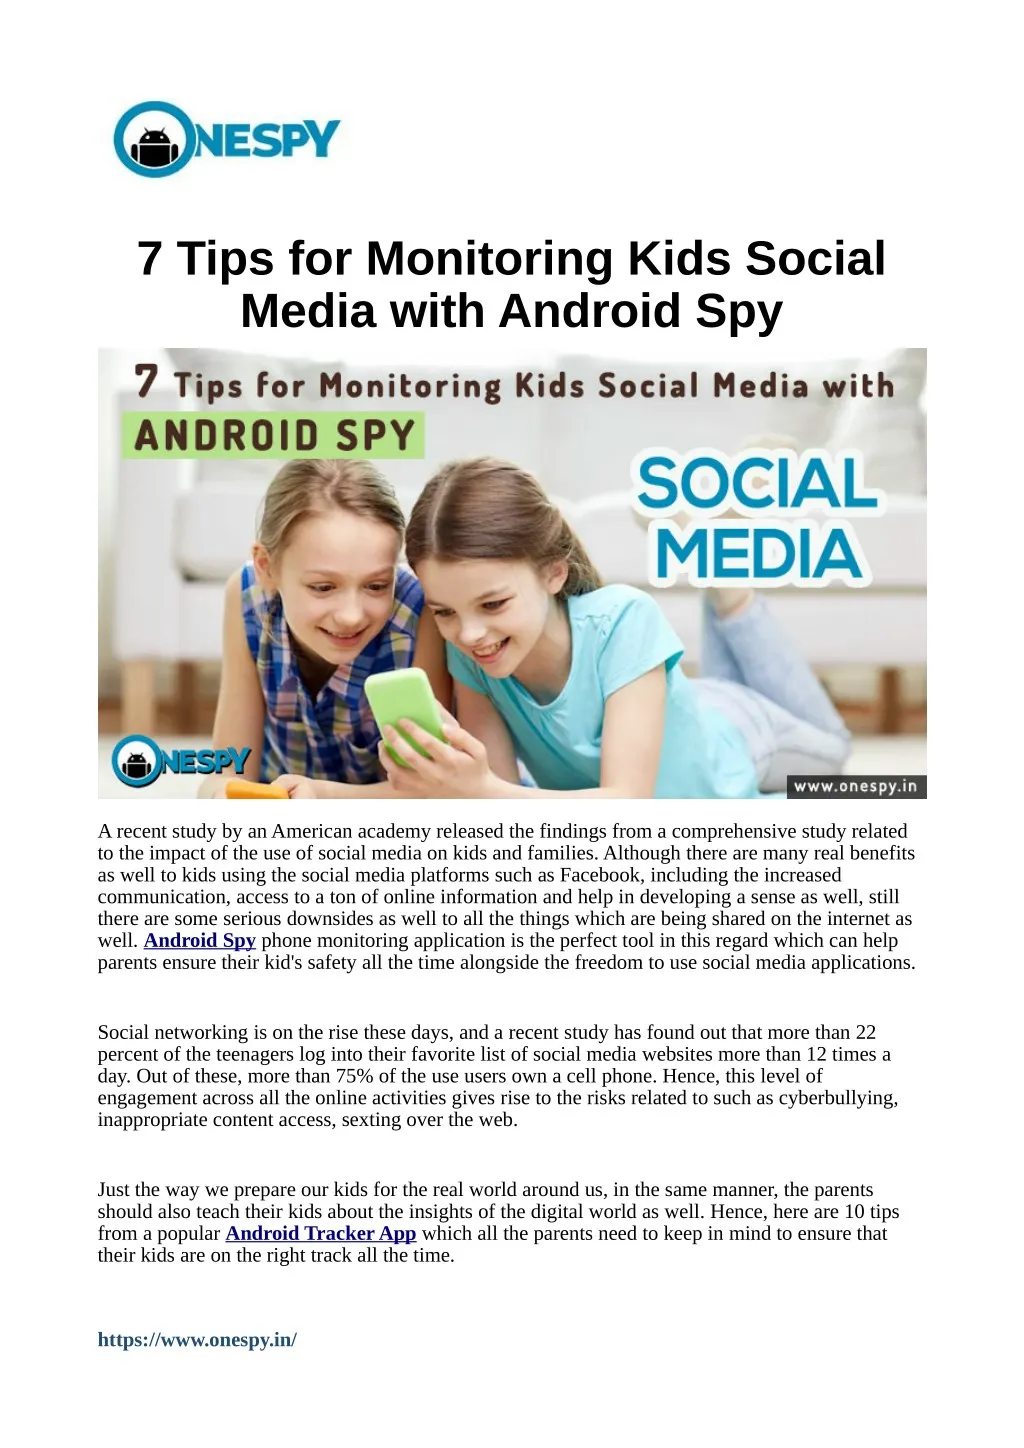 7 tips for monitoring kids social media with